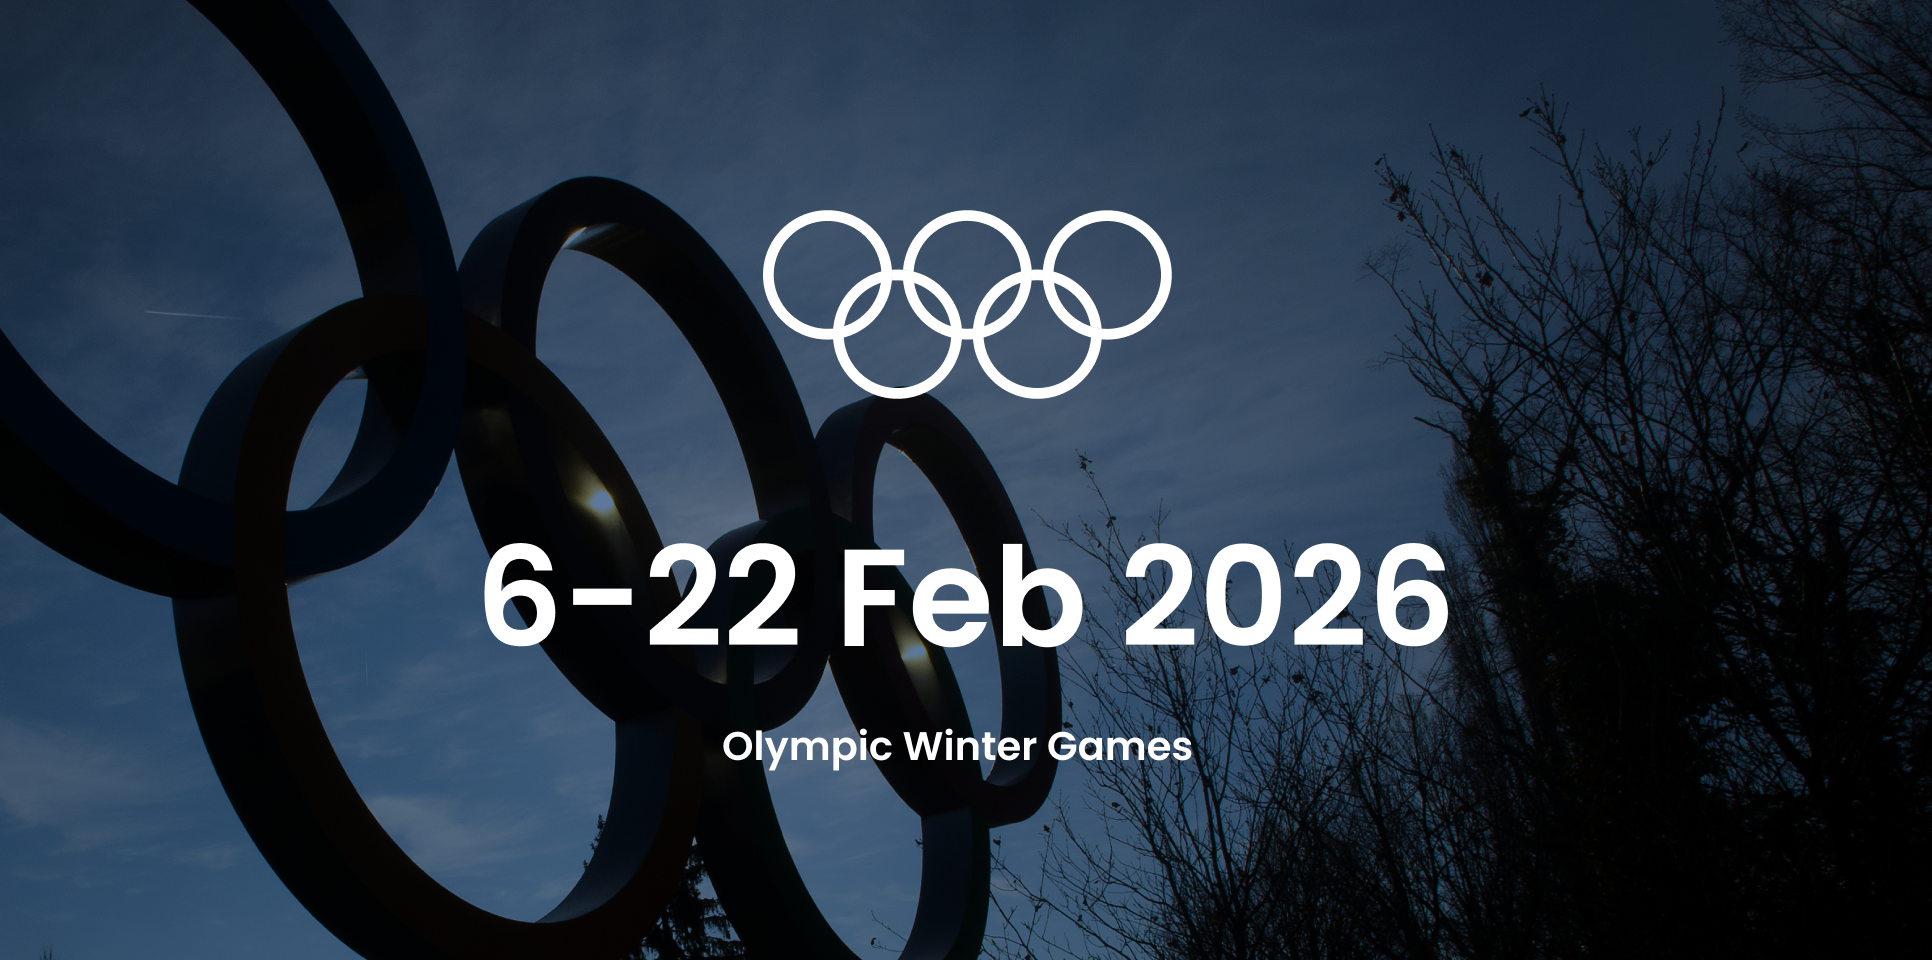 Image with dates for the start and end of the Winter Olympics Games: 6-22 February 2026